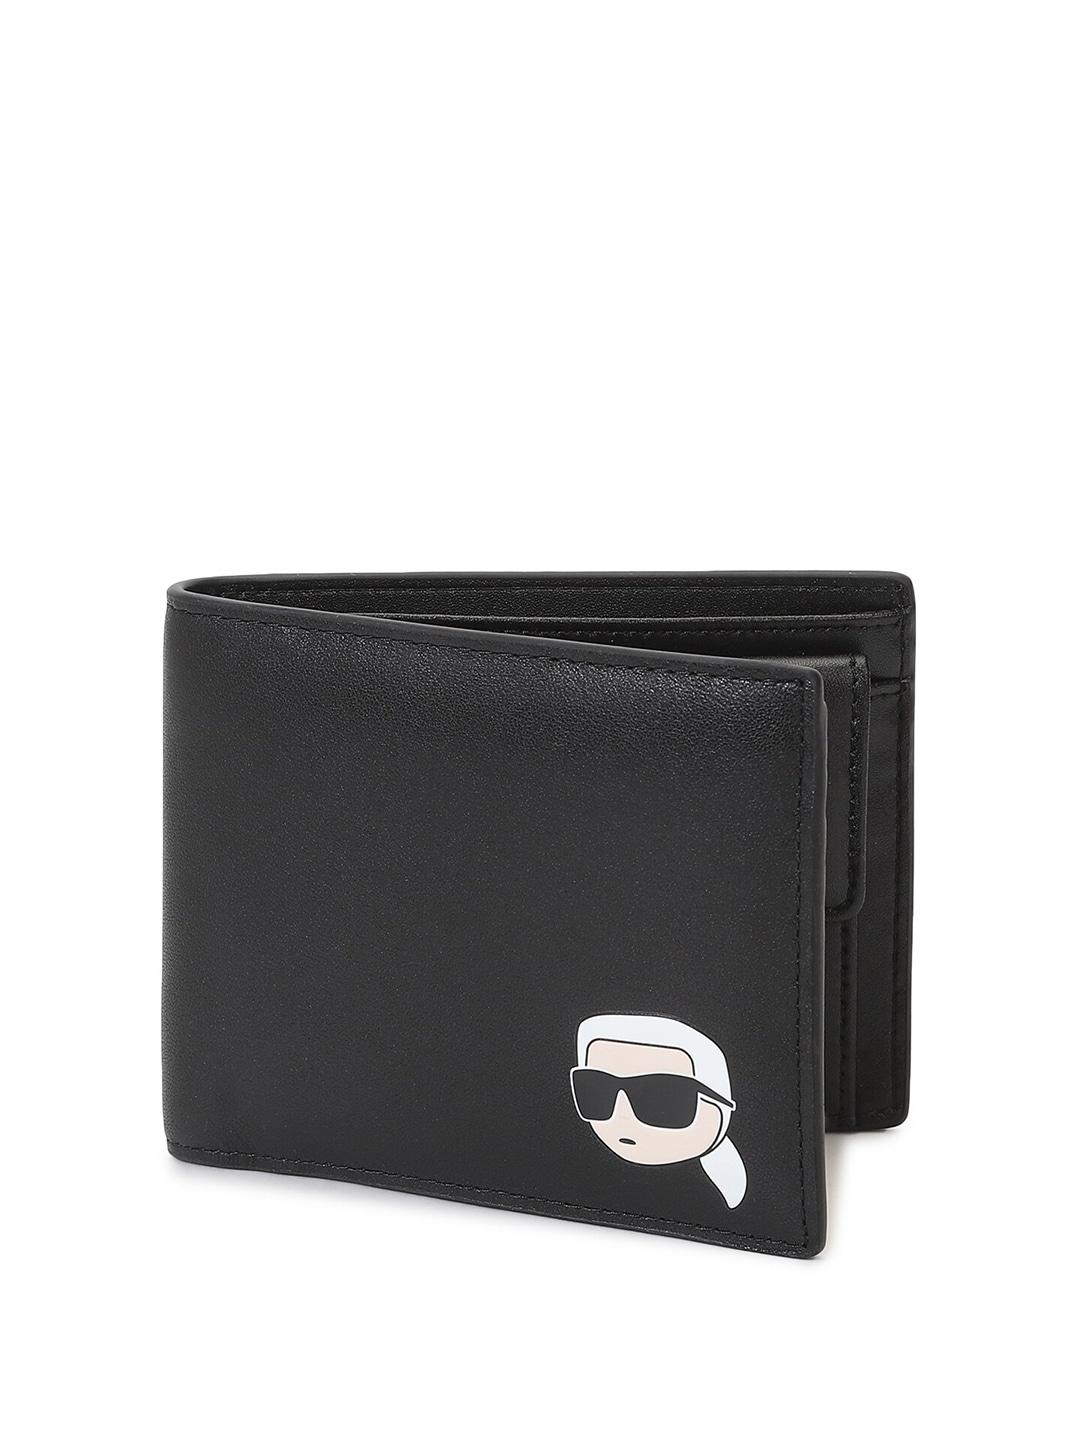 karl lagerfeld men graphic printed leather two fold wallet